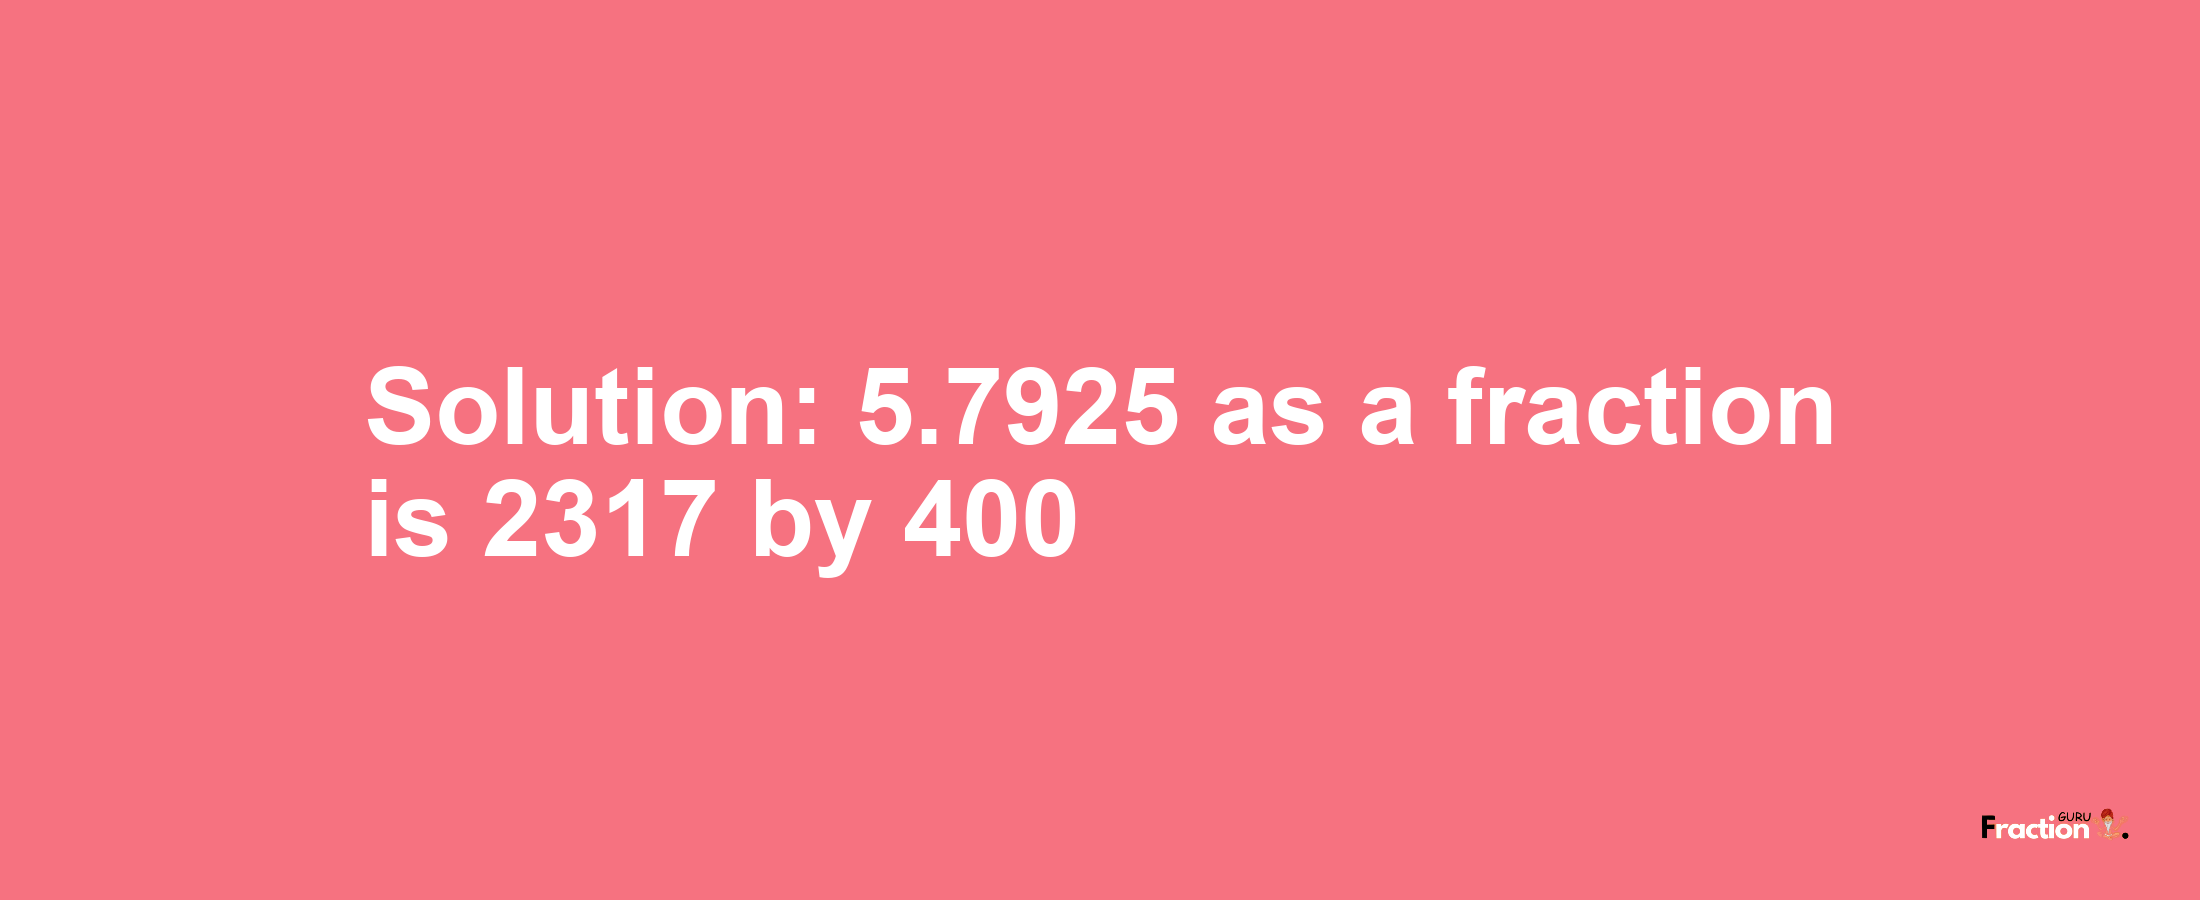 Solution:5.7925 as a fraction is 2317/400